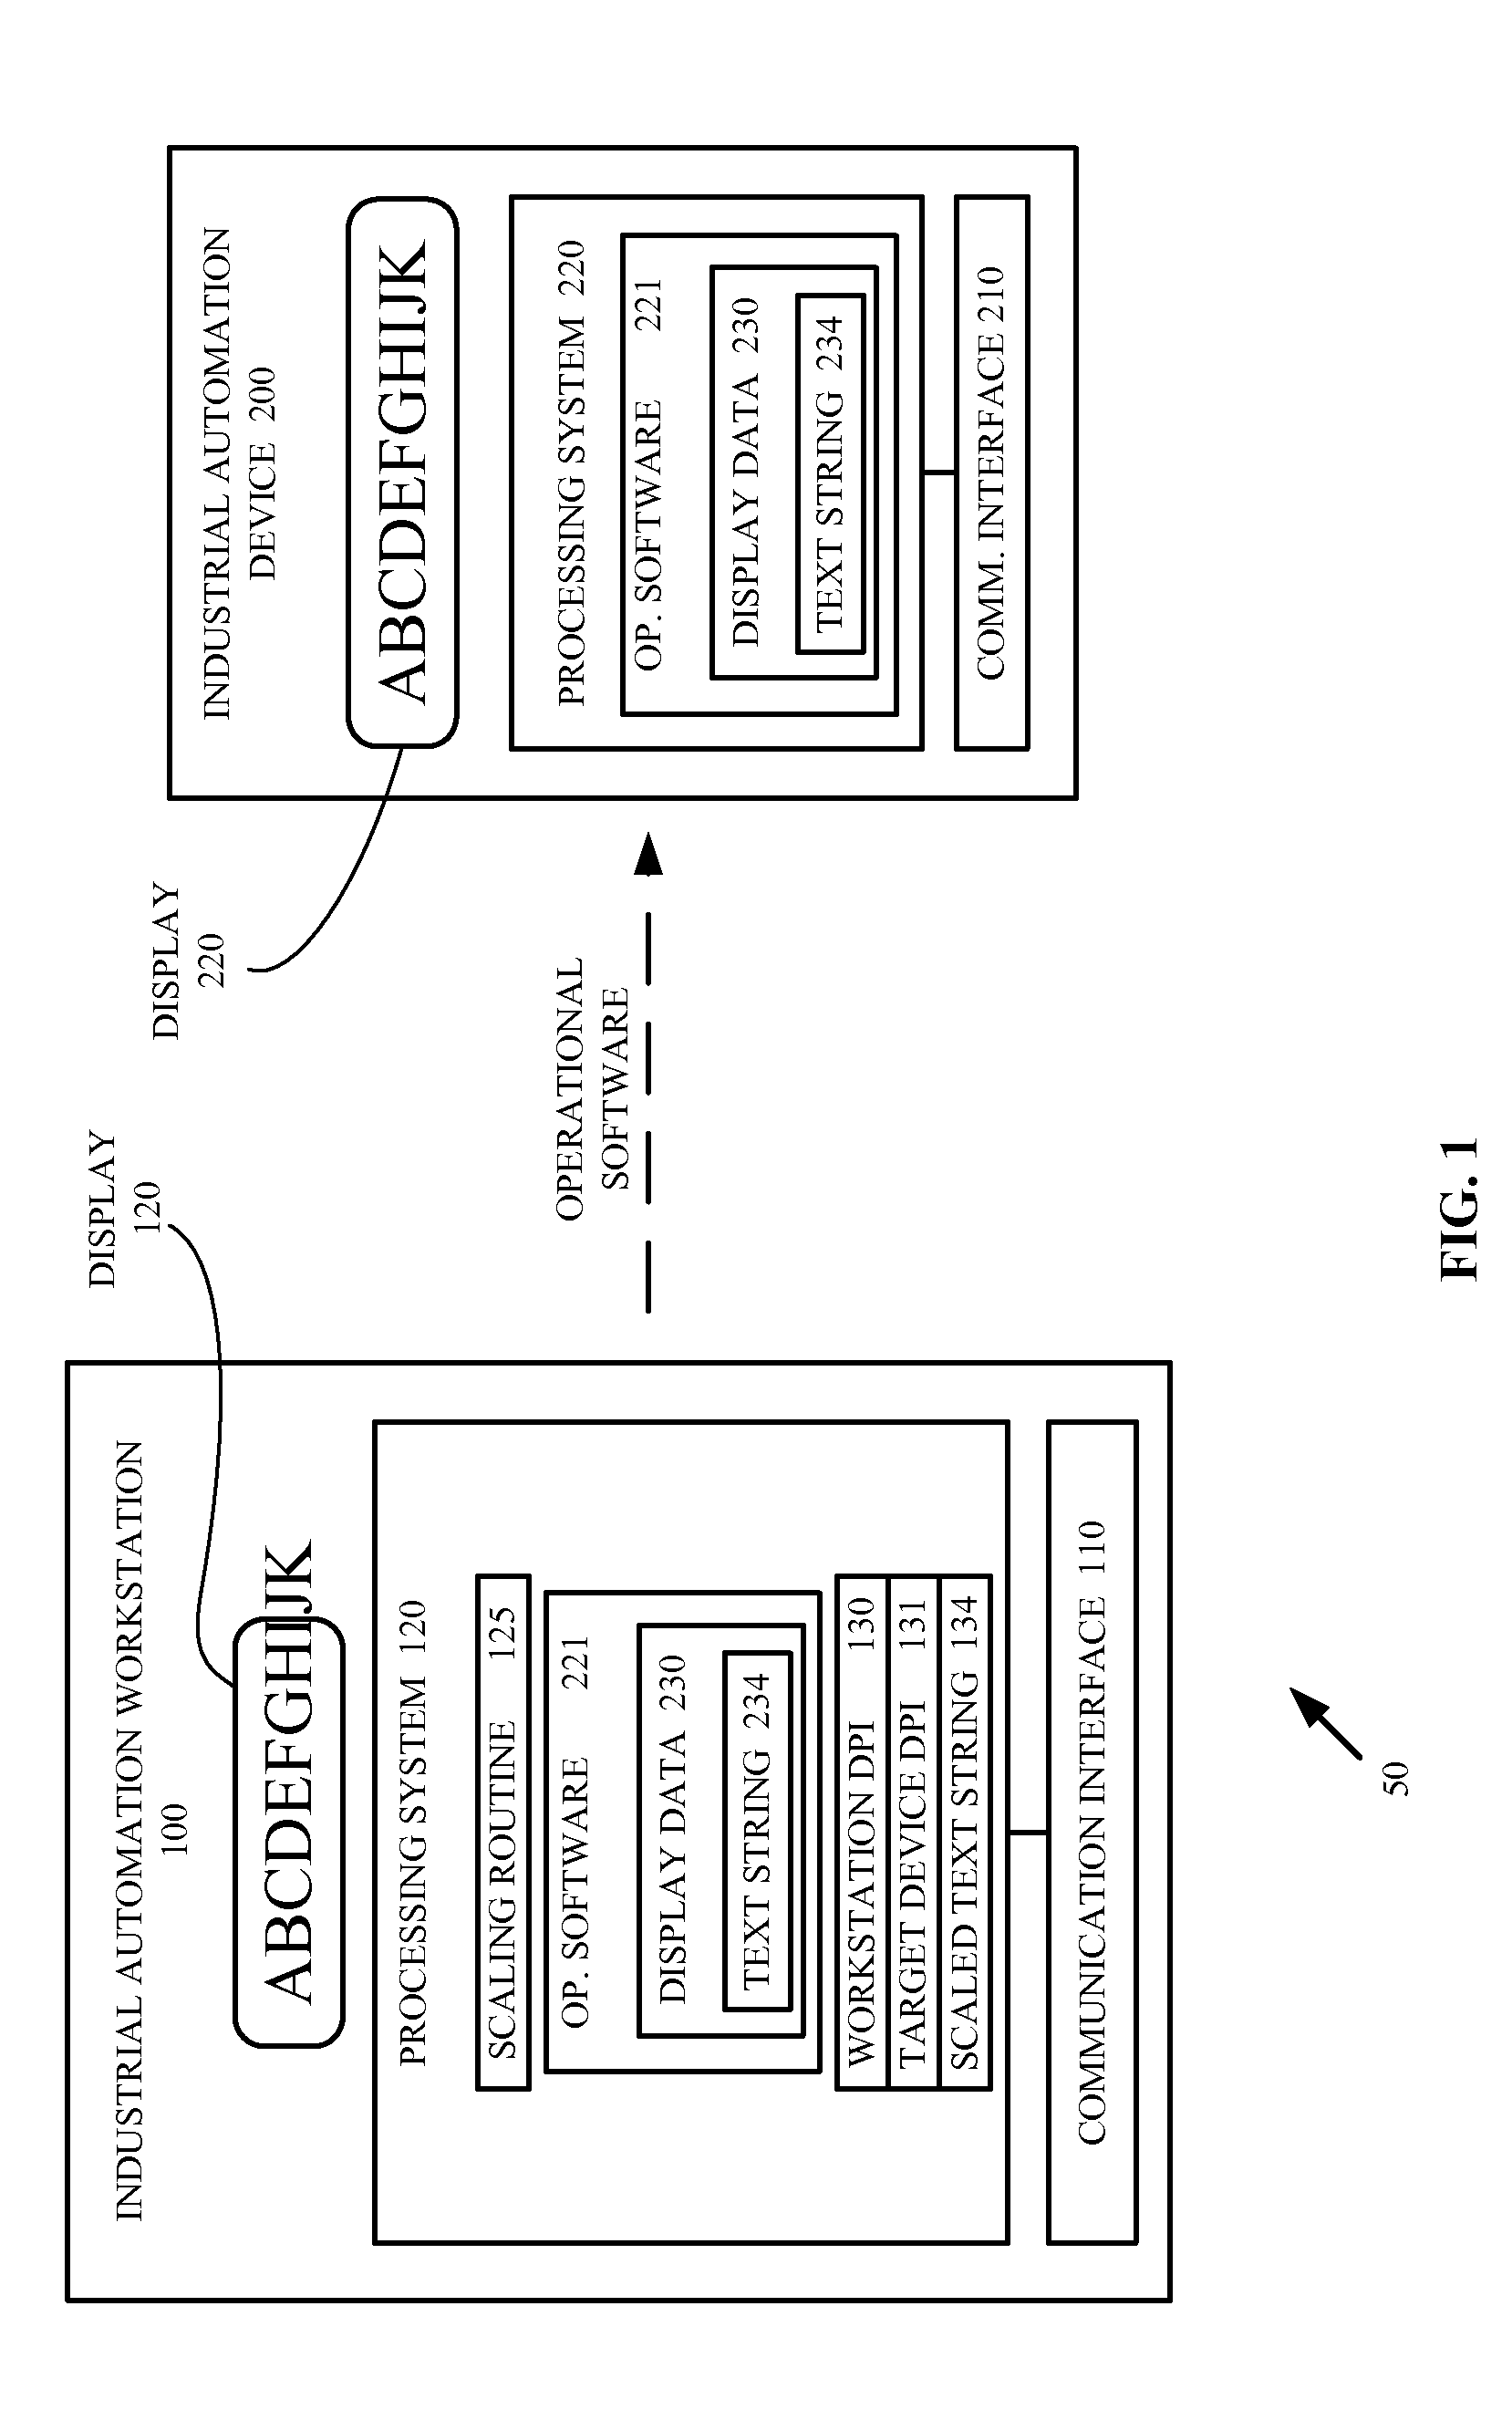 Industrial automation workstation and display method for scaling and displaying text destined for a target industrial automation device